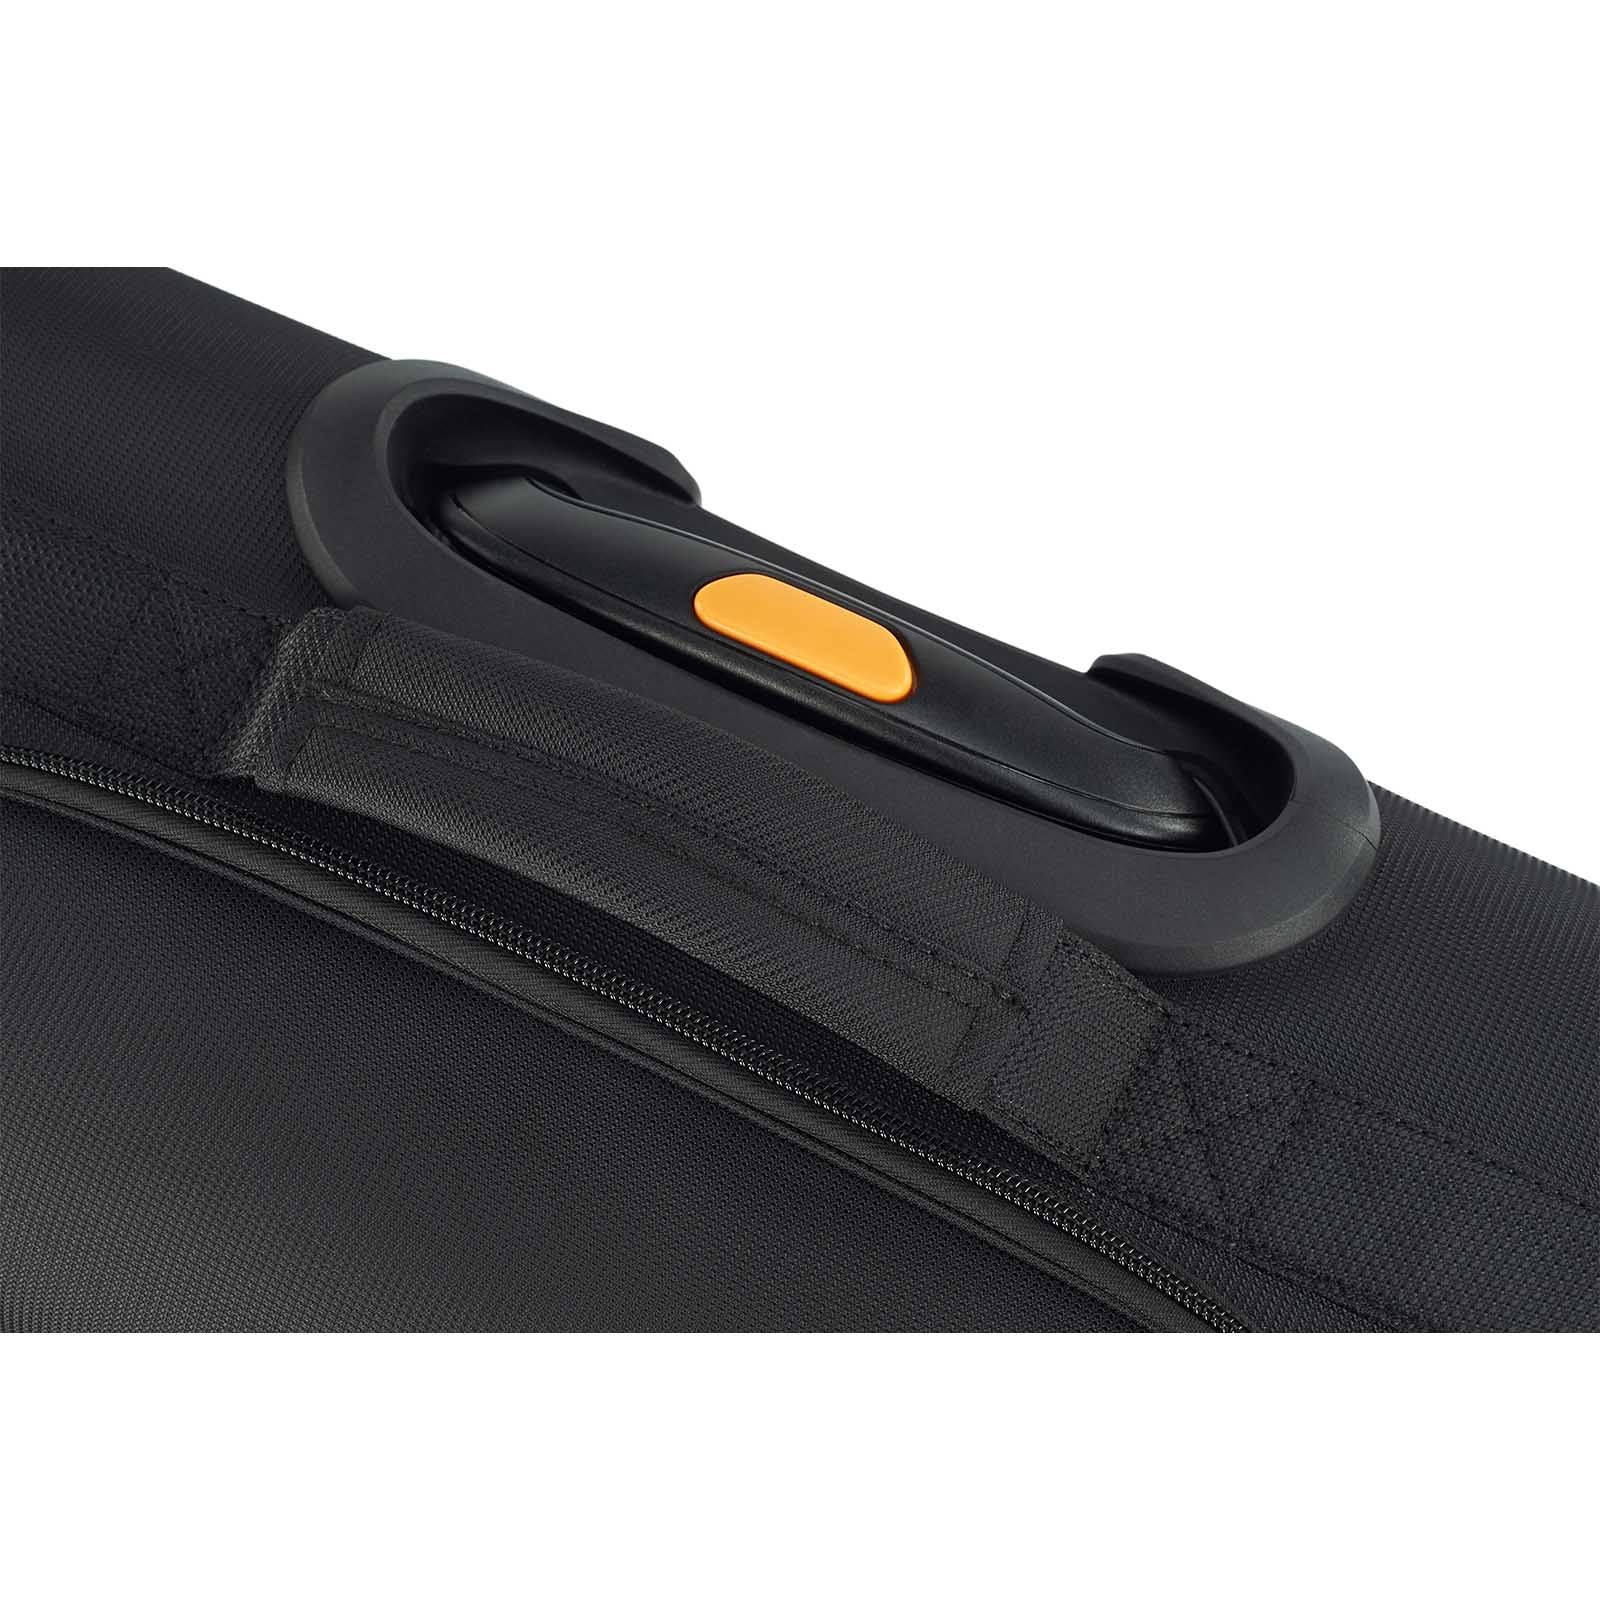 American-Tourister-Applite-4-Eco-Underseater-Suitcase-Black-Mustard-Handle